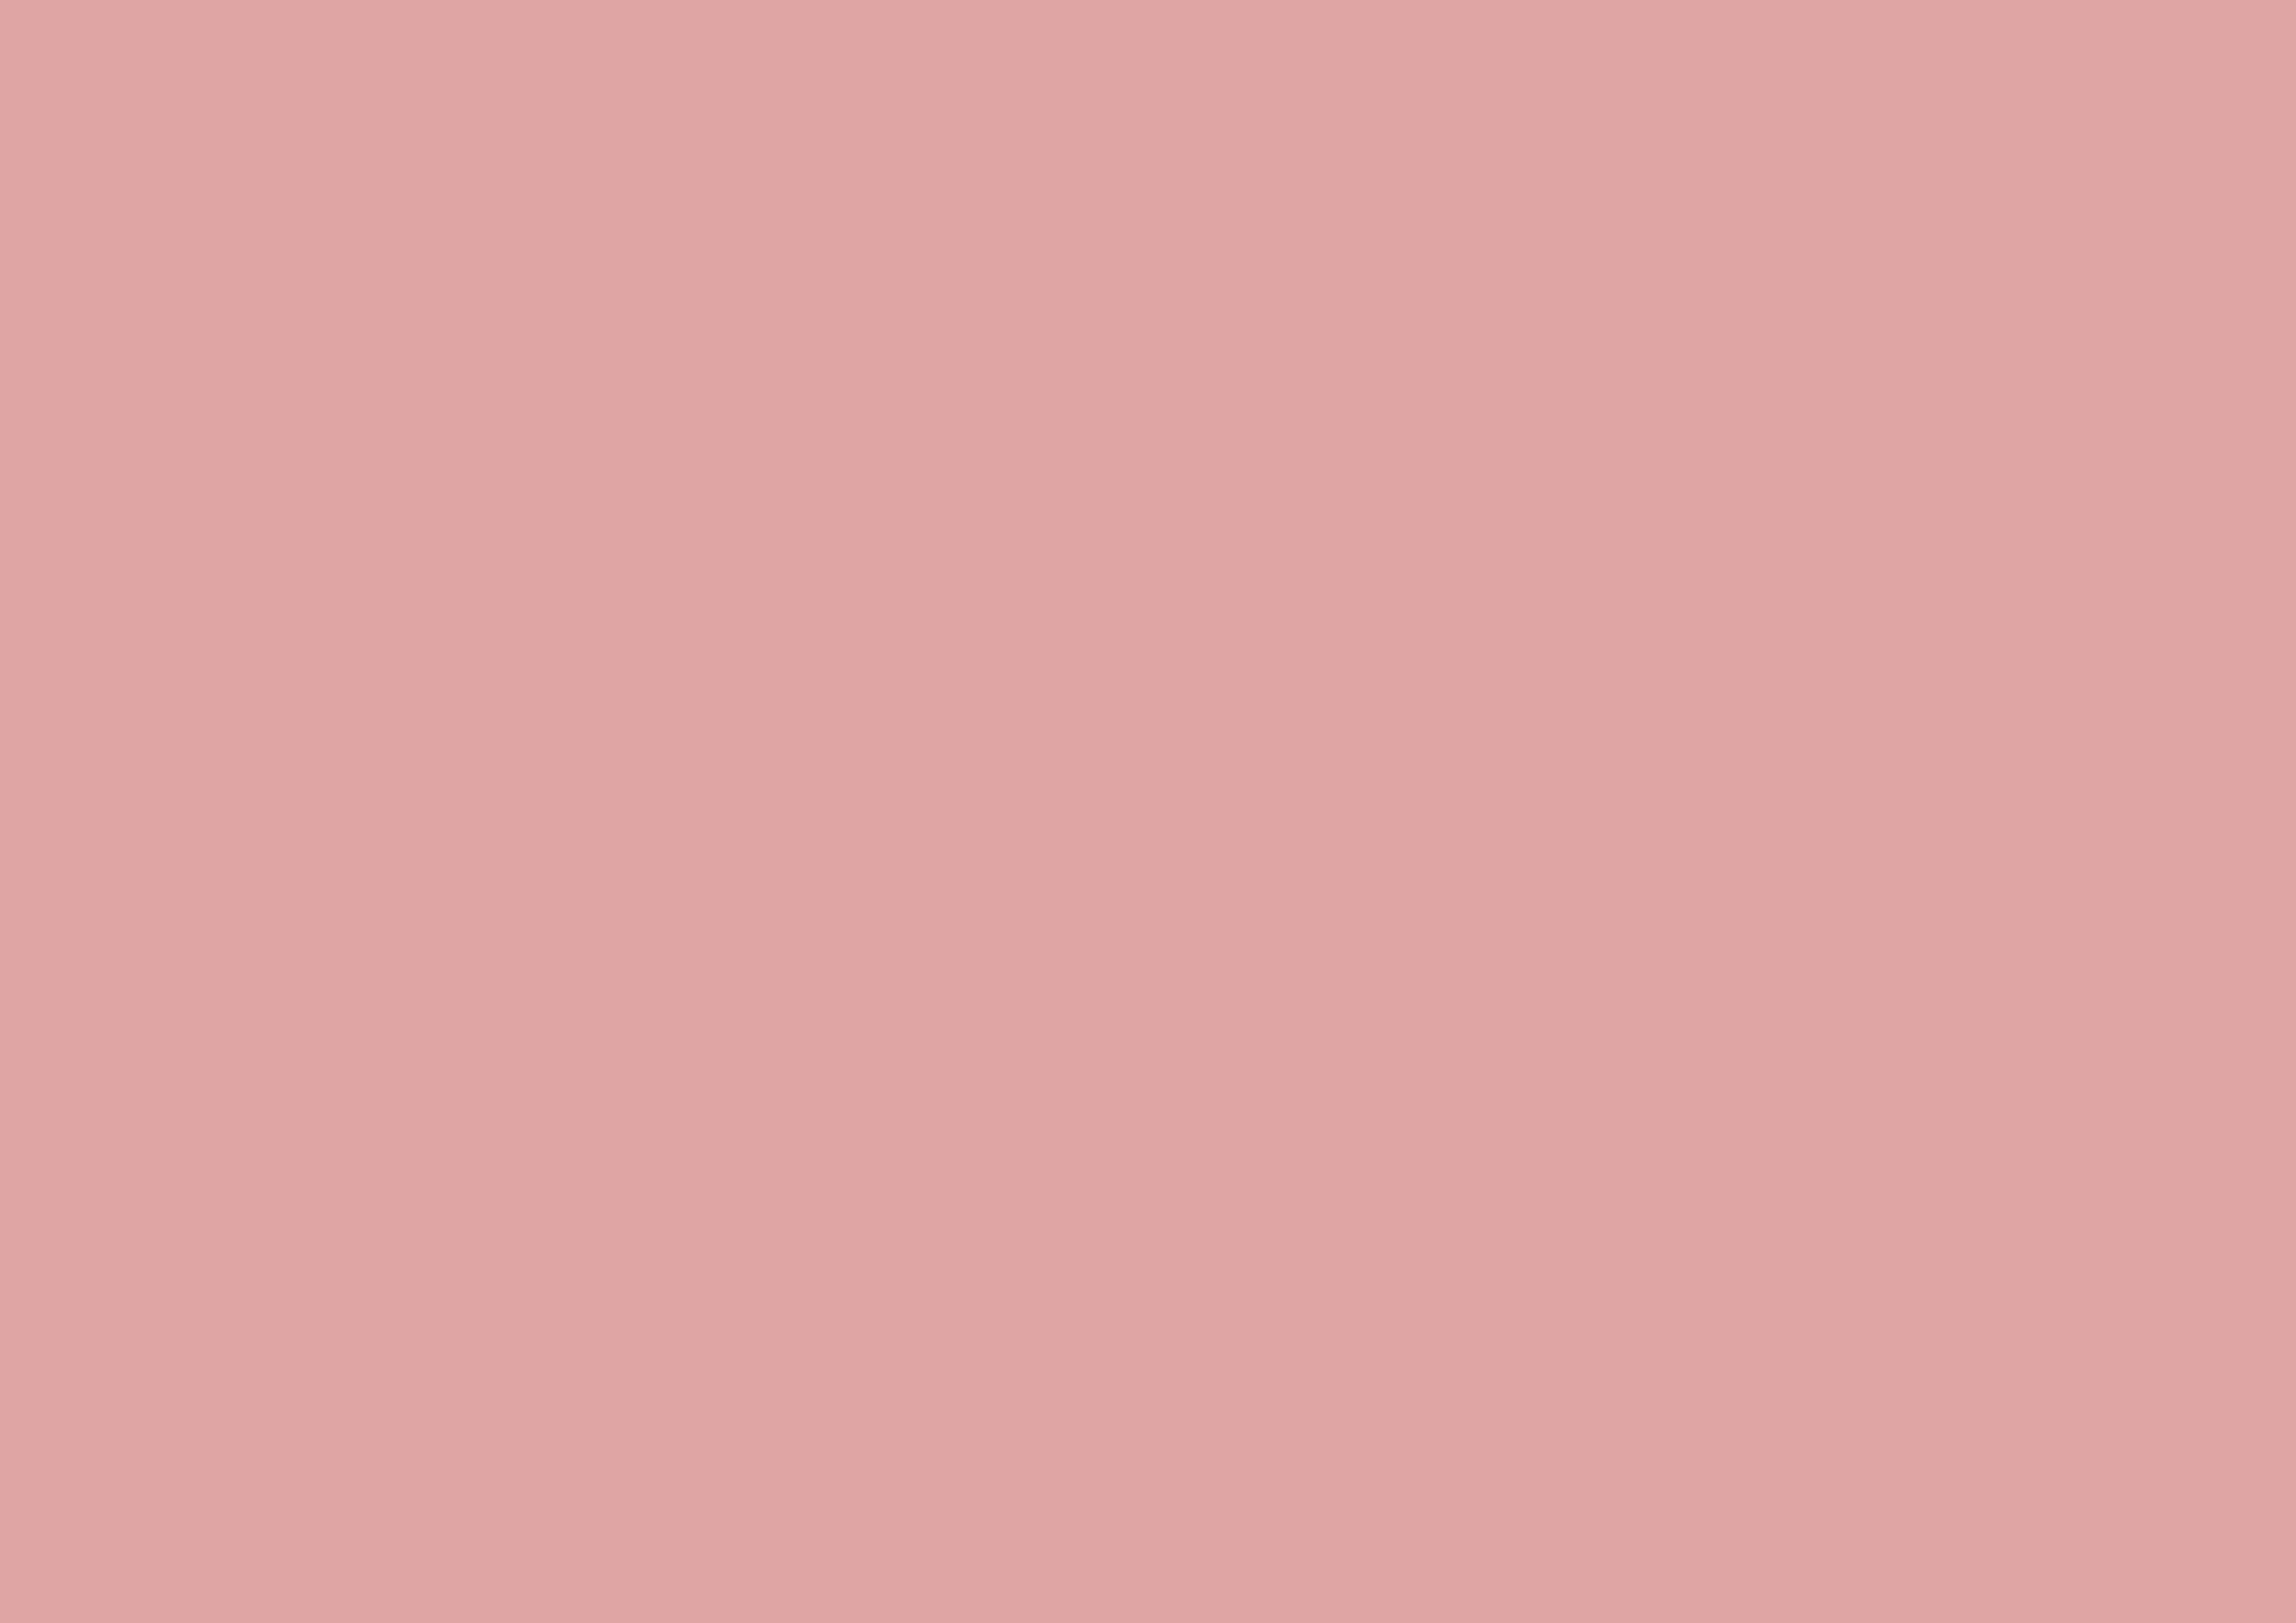 3508x2480 Pastel Pink Solid Color Background